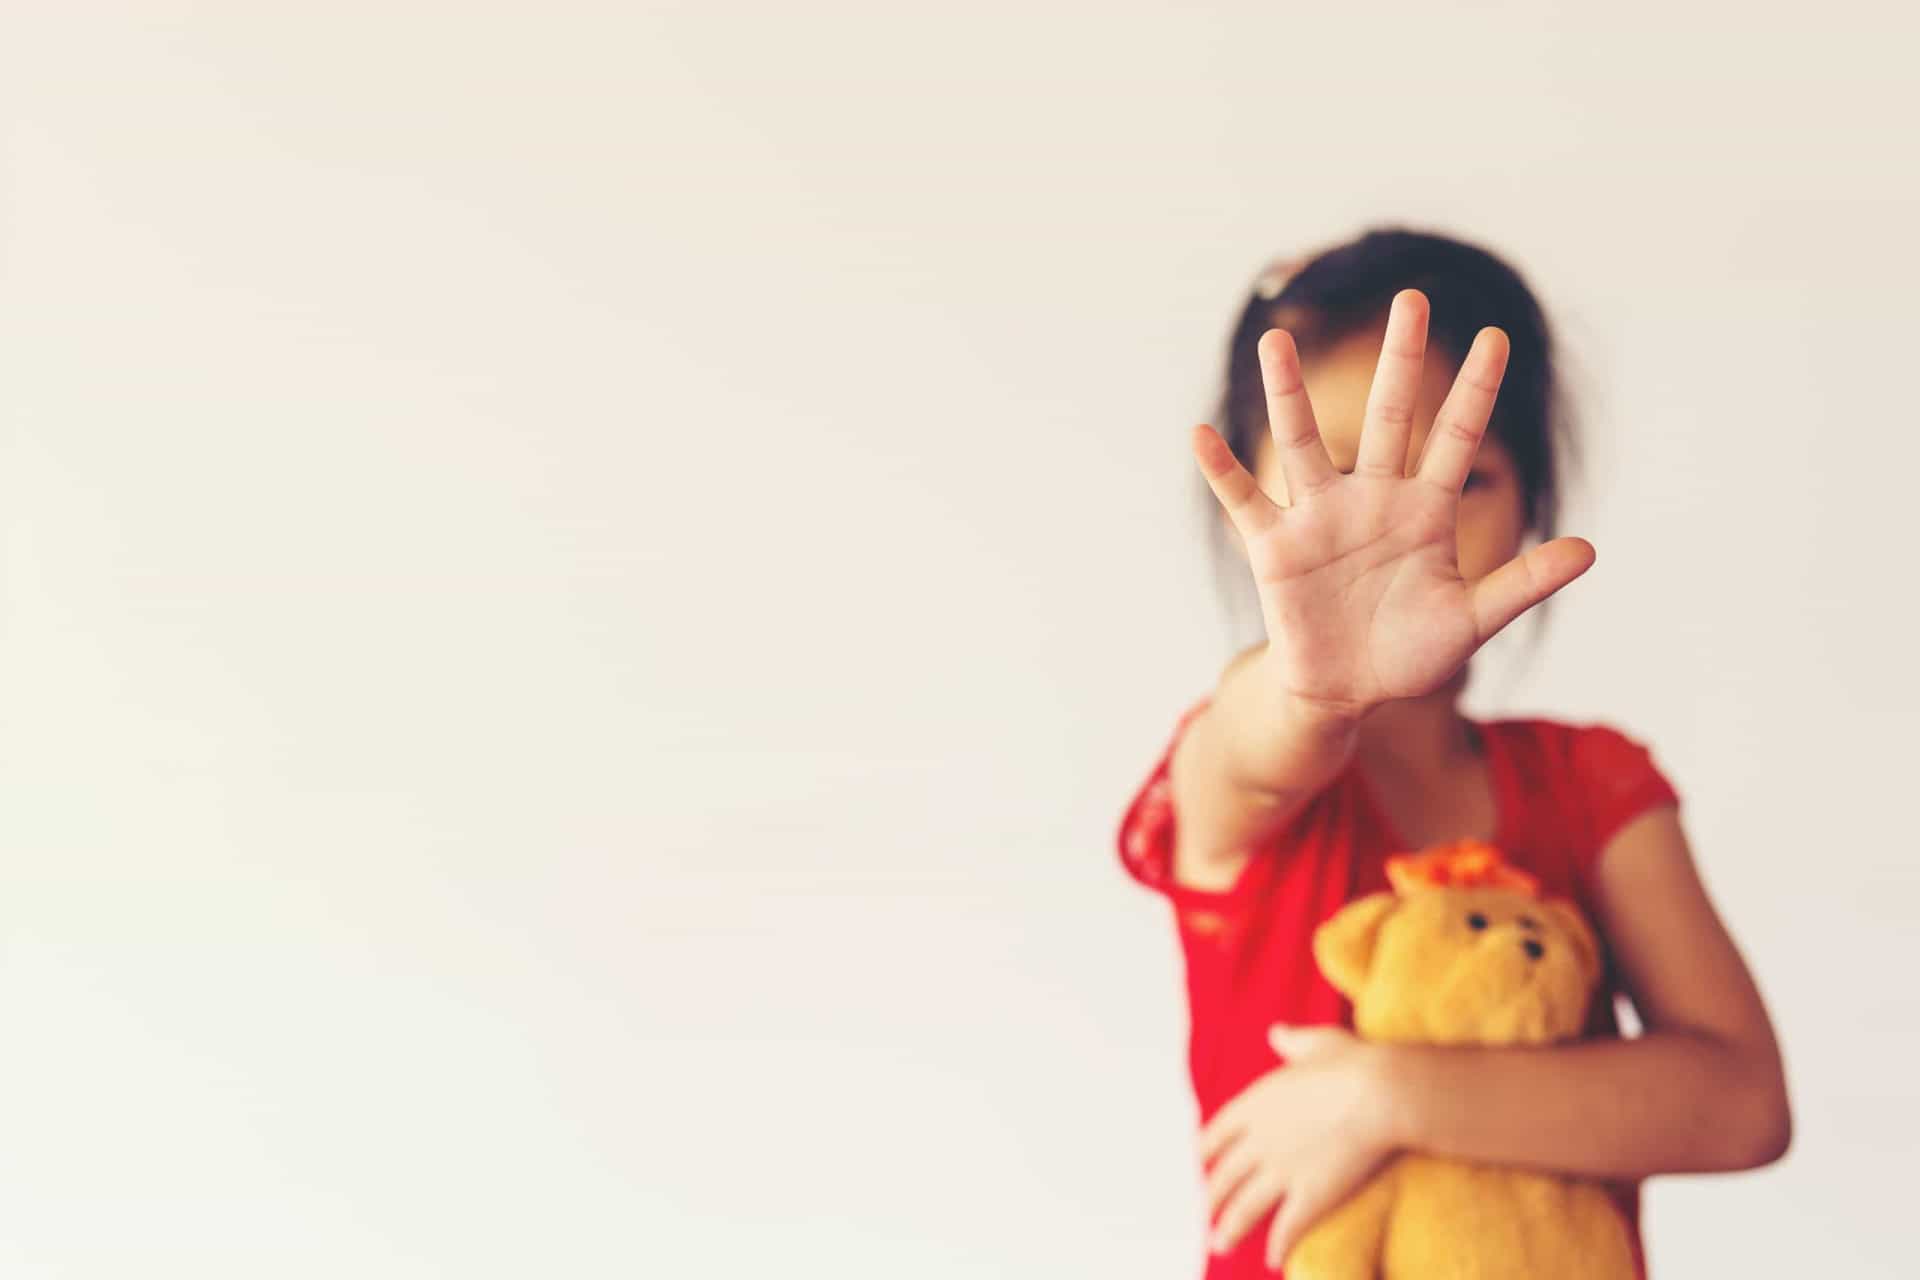 <p><span>There is no evidence to suggest that children with selective mutism are more likely to have experienced trauma or abuse.</span></p><p><a href="https://www.msn.com/en-us/community/channel/vid-7xx8mnucu55yw63we9va2gwr7uihbxwc68fxqp25x6tg4ftibpra?cvid=94631541bc0f4f89bfd59158d696ad7e">Follow us and access great exclusive content everyday</a></p>